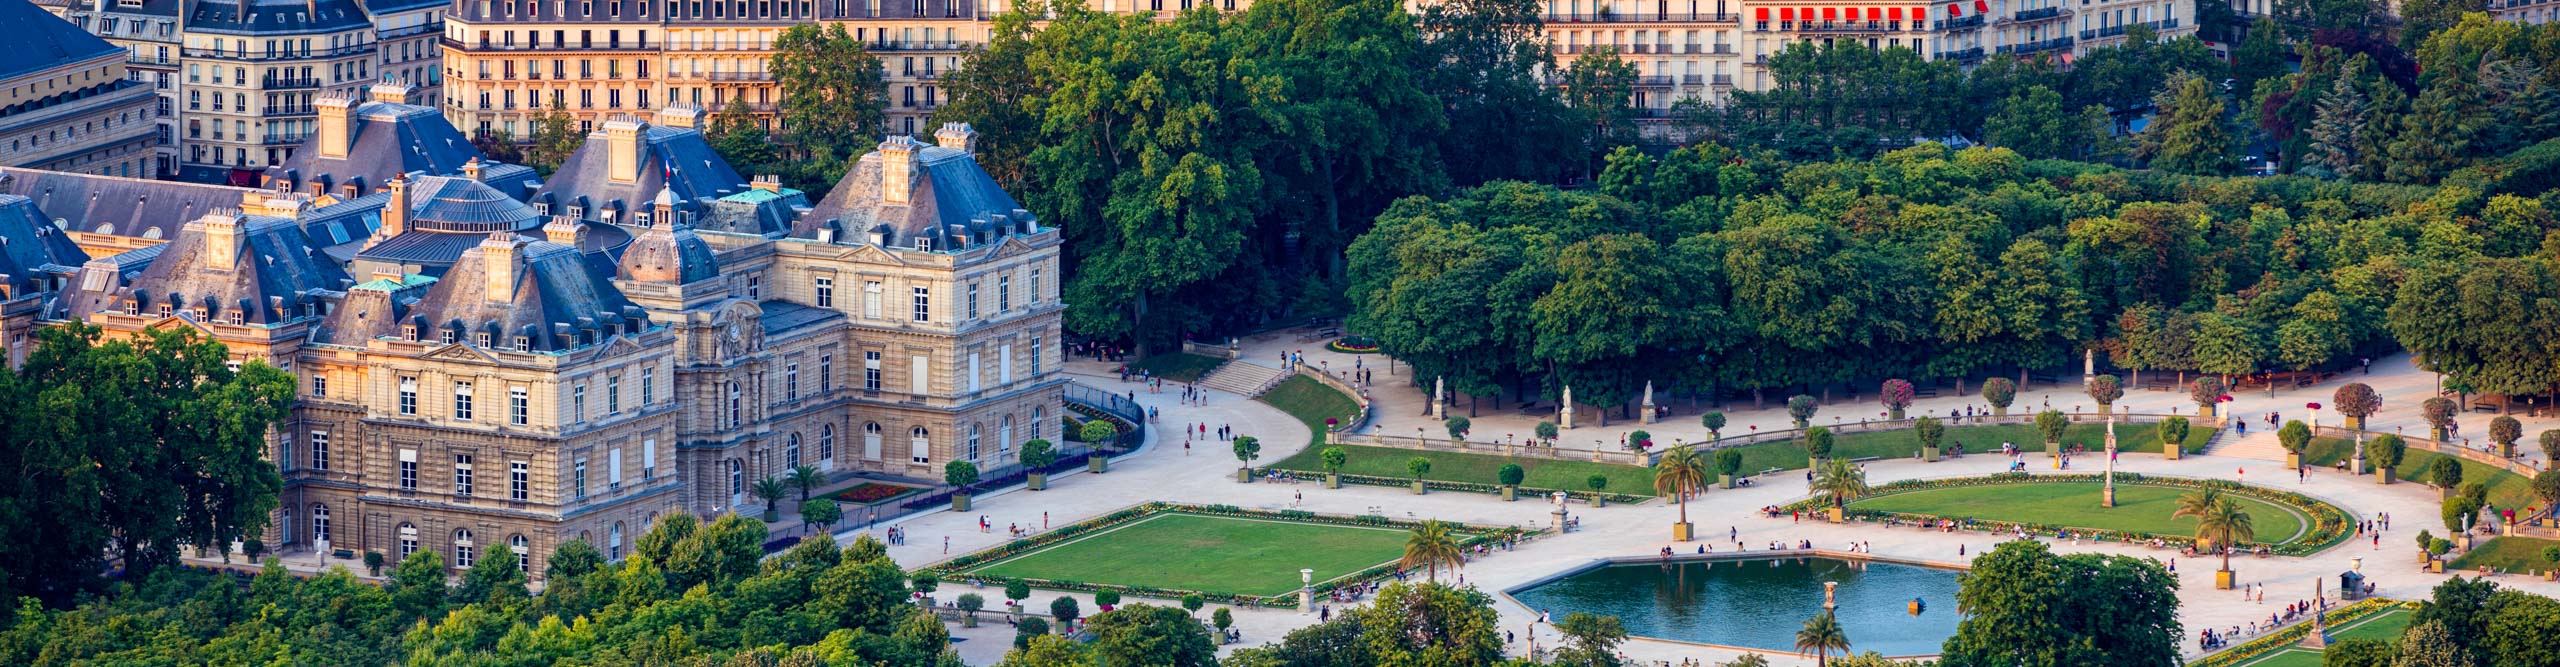 aerial view of Luxembourg Palace on a sunny day 